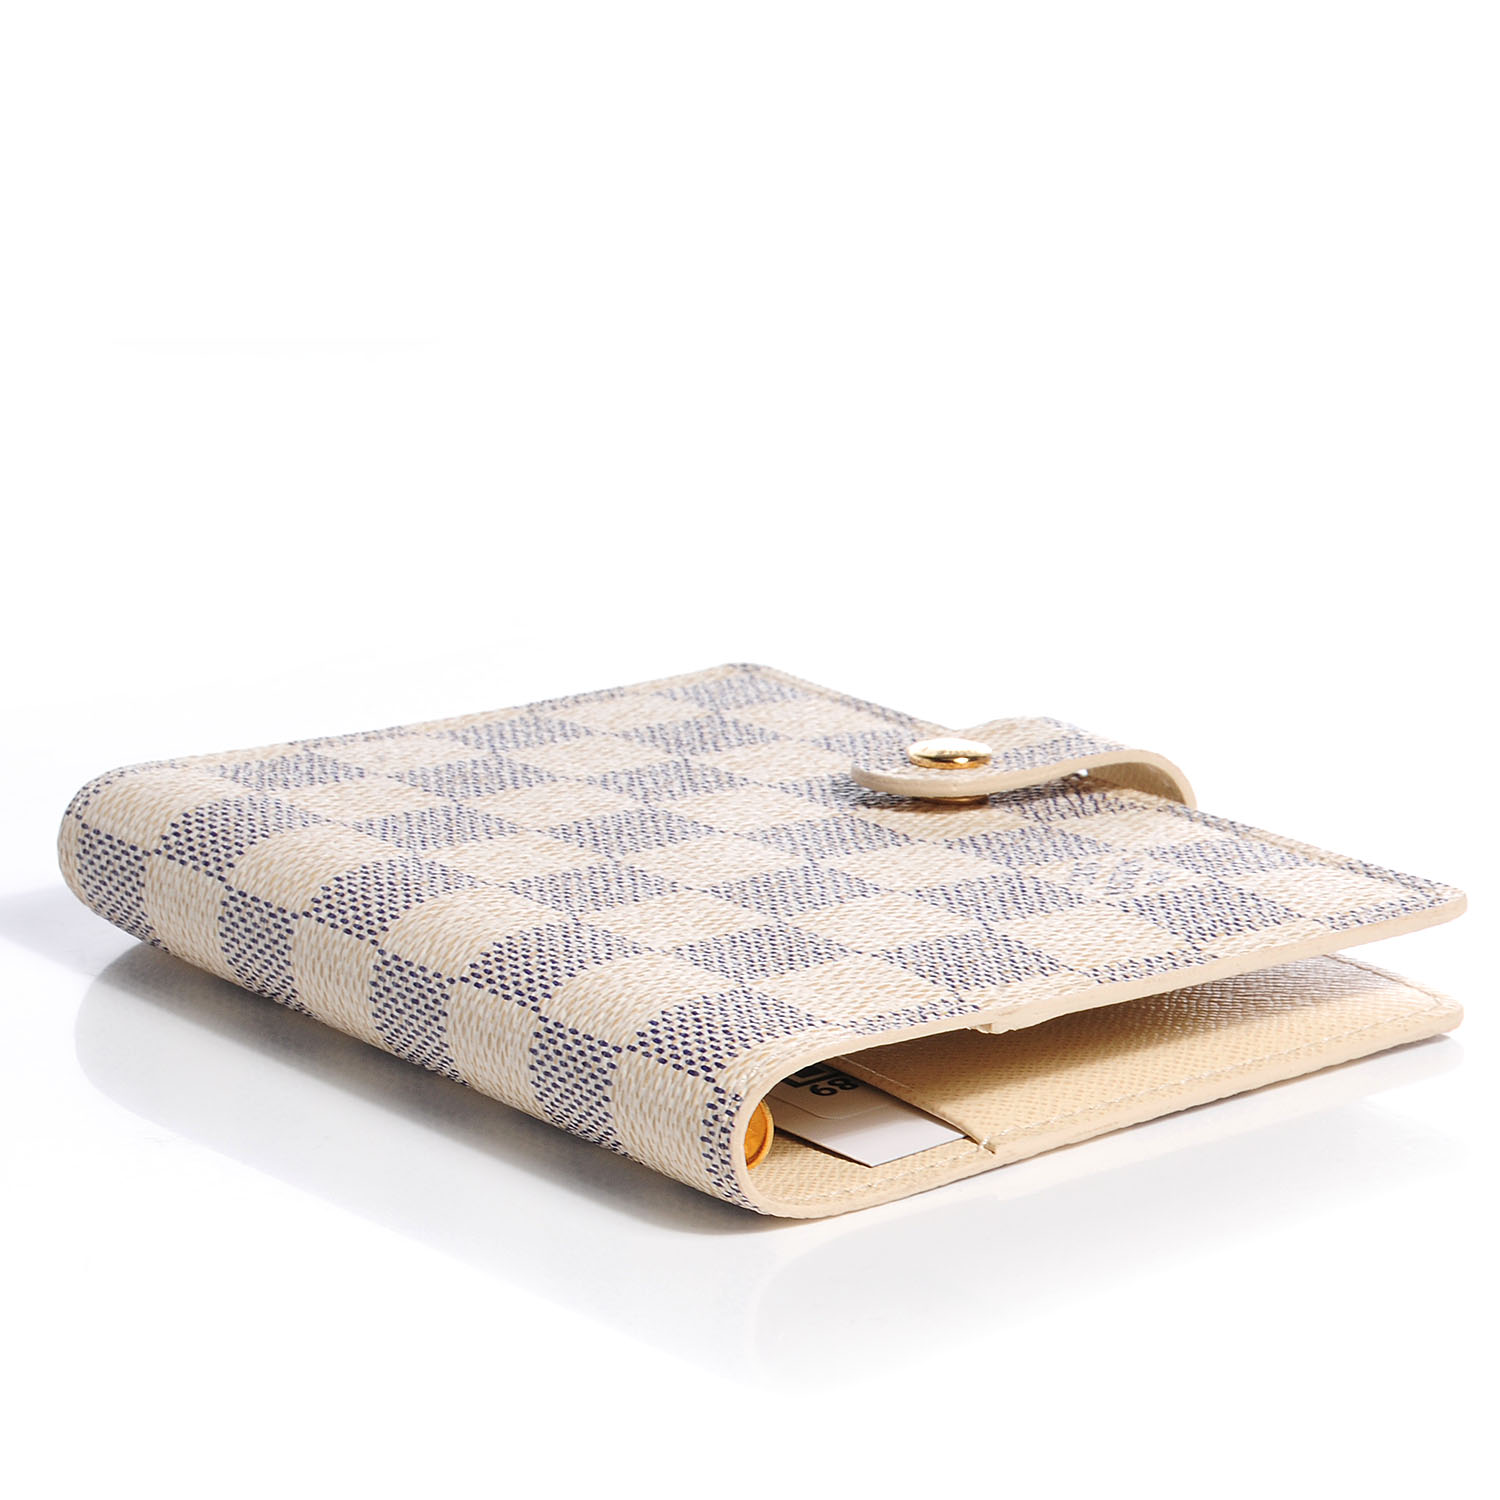 Shop Louis Vuitton LV SMALL RING AGENDA COVER Planner R20700 by